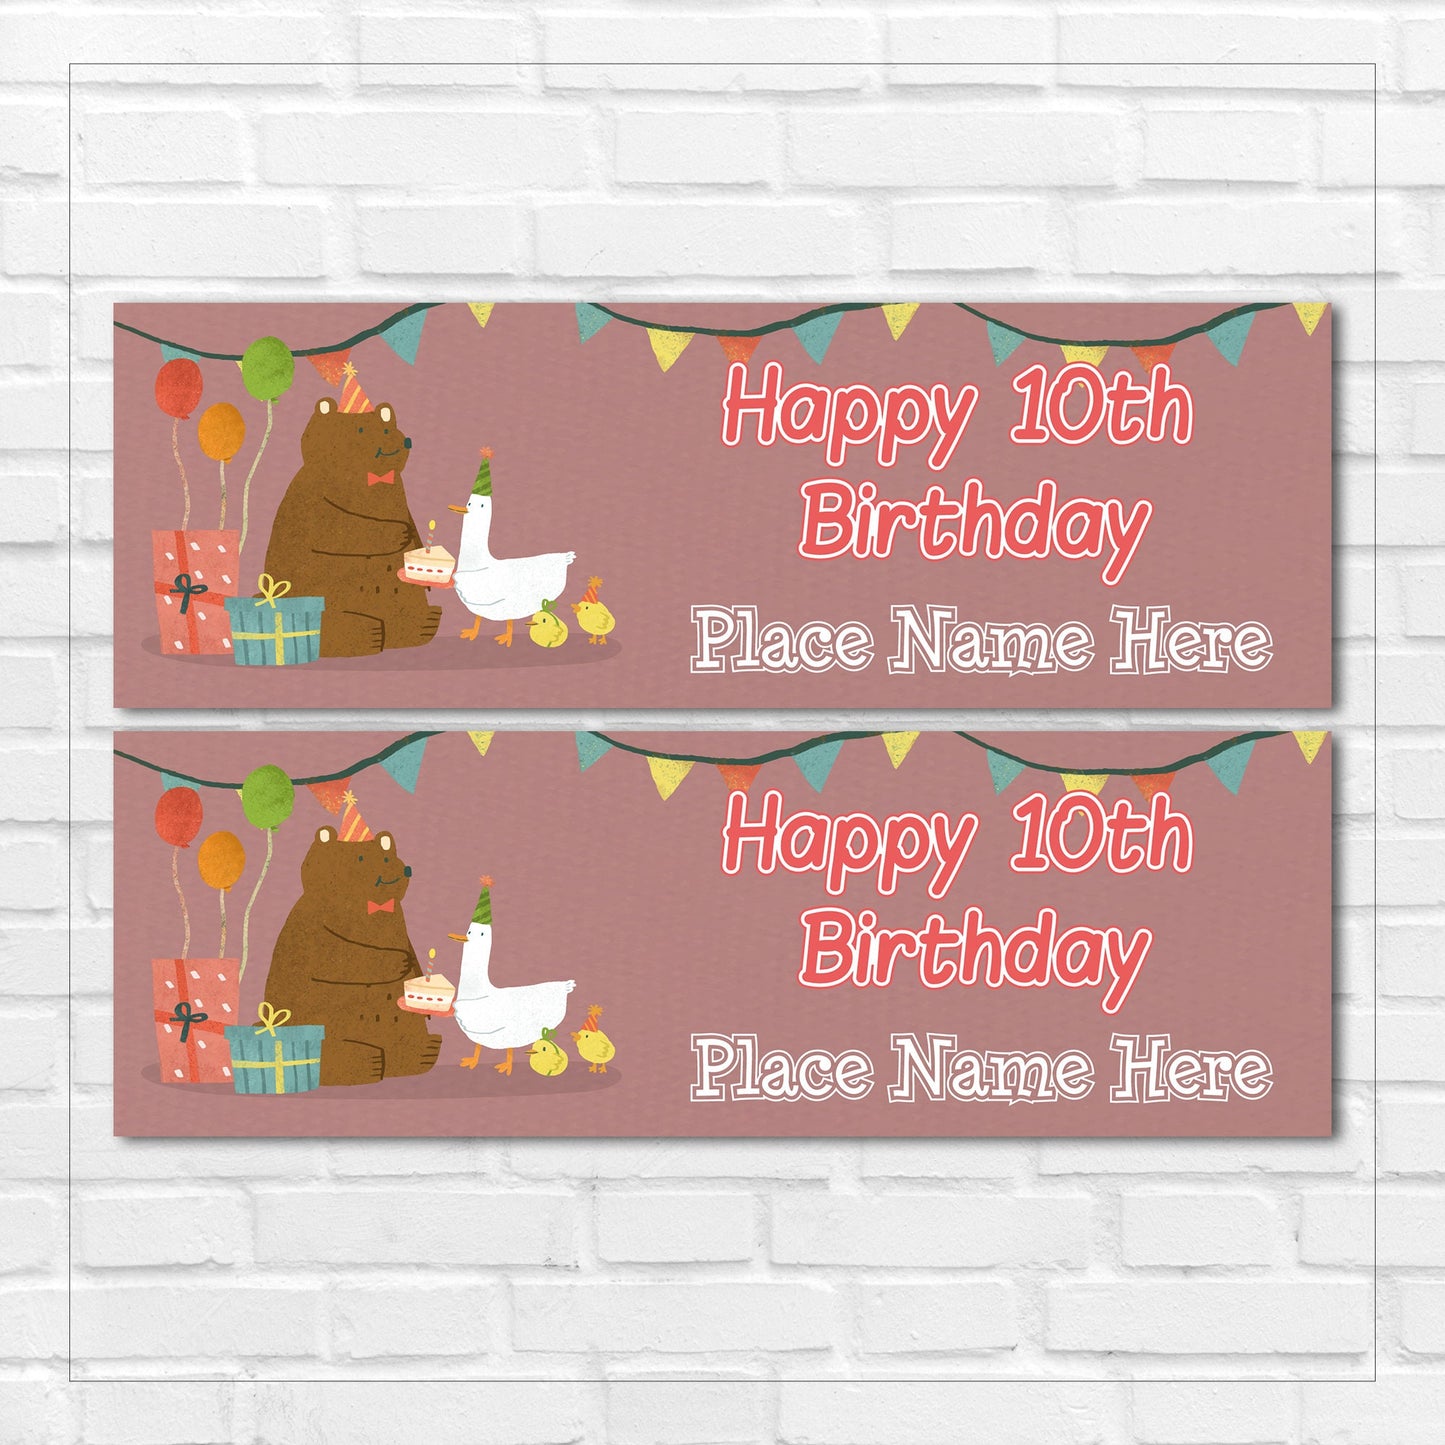 Set of 2 Personalised Birthday Banners - 16th 18th 21st 30th 40th 50th Birthday Party - Celebration - Occasion BBAN-0479